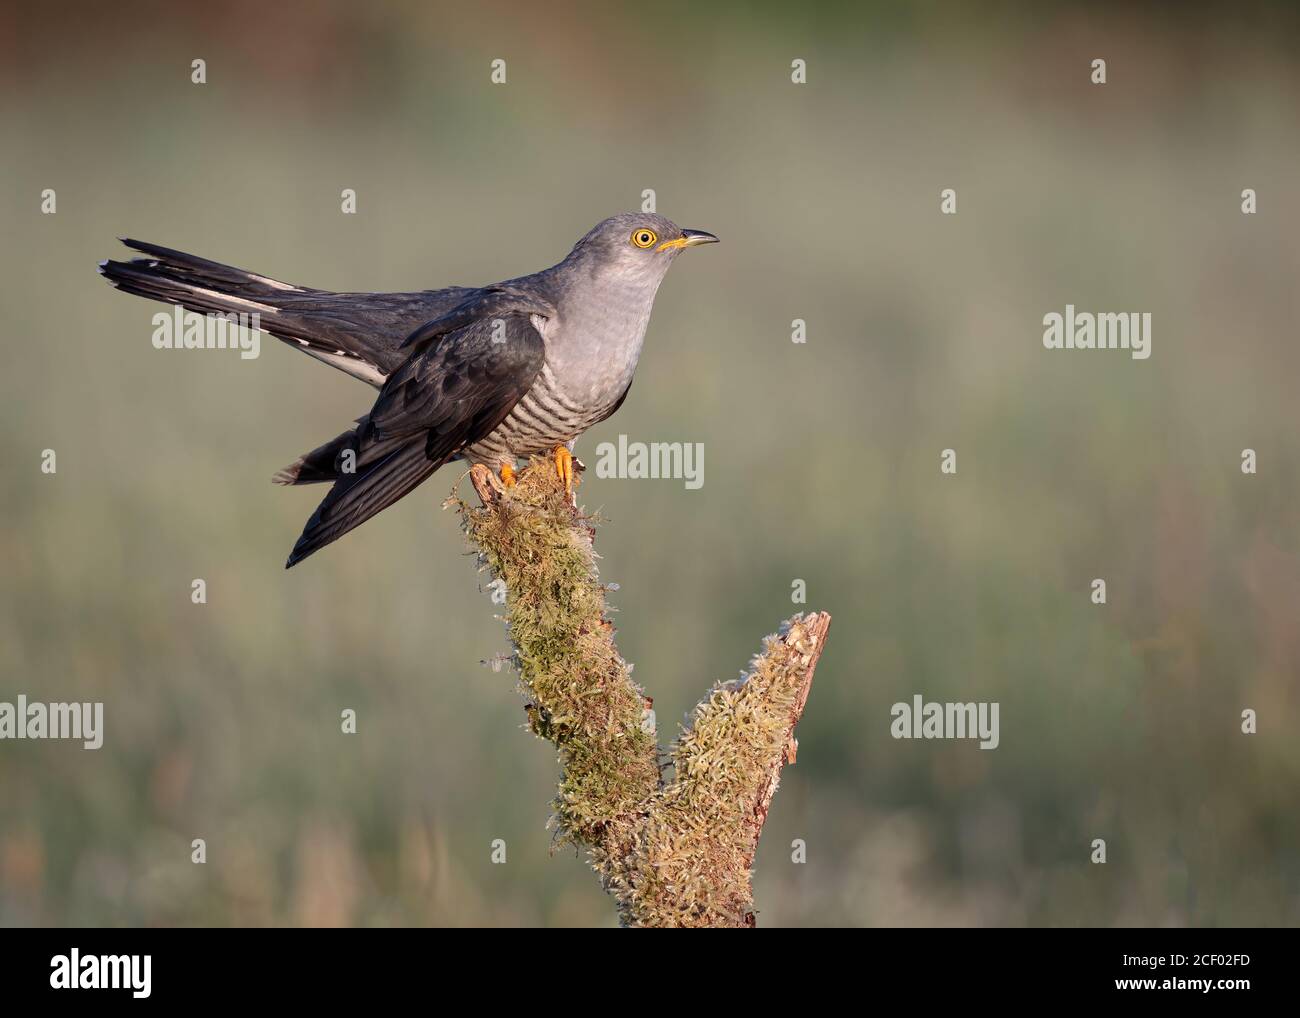 Male Cuckoo on Mossy Branch Stock Photo